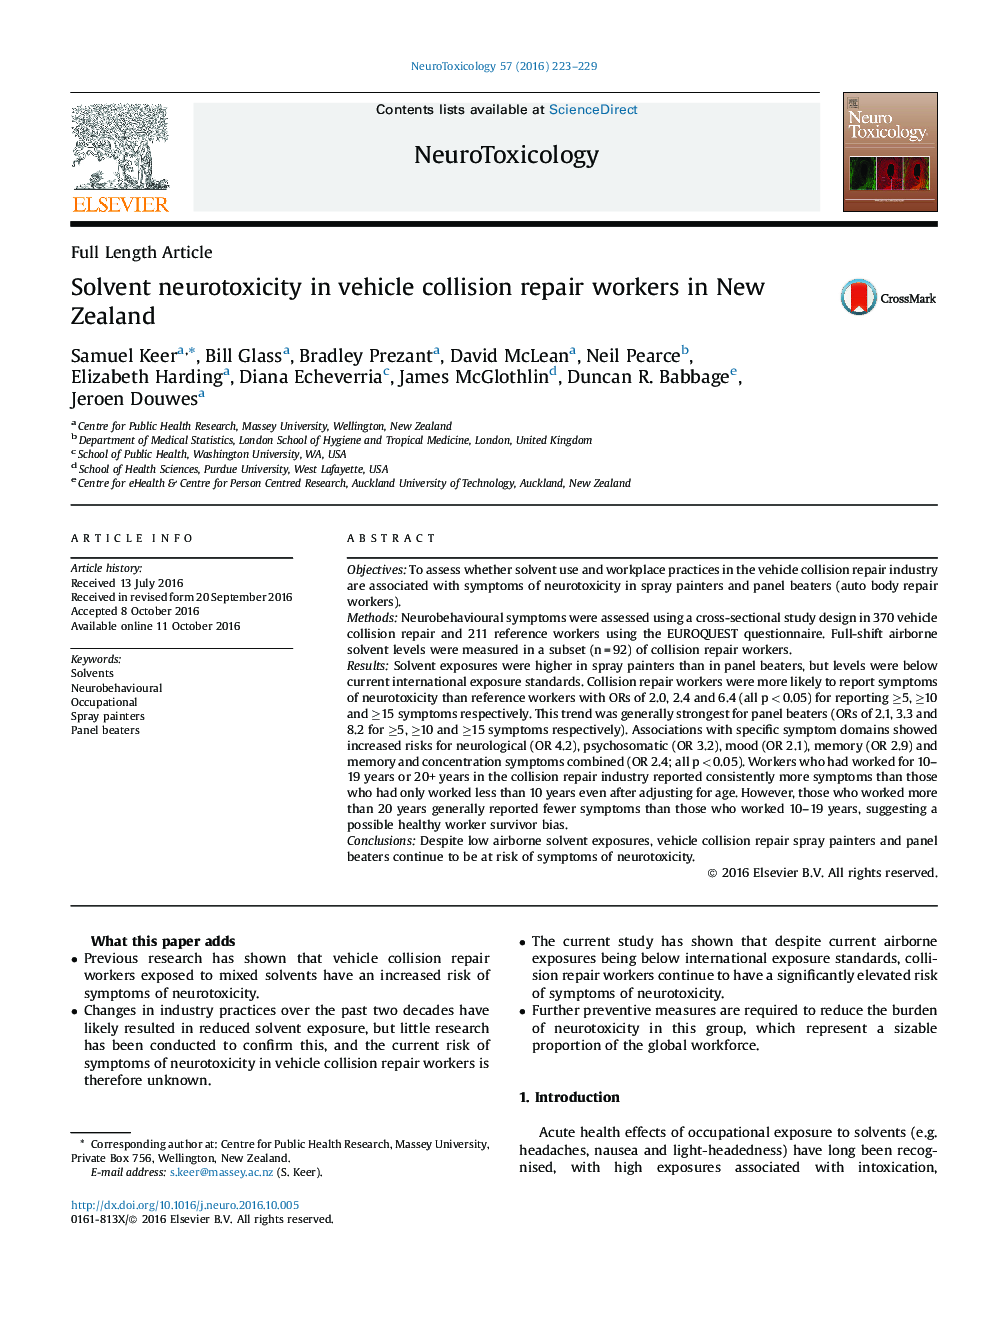 Solvent neurotoxicity in vehicle collision repair workers in New Zealand